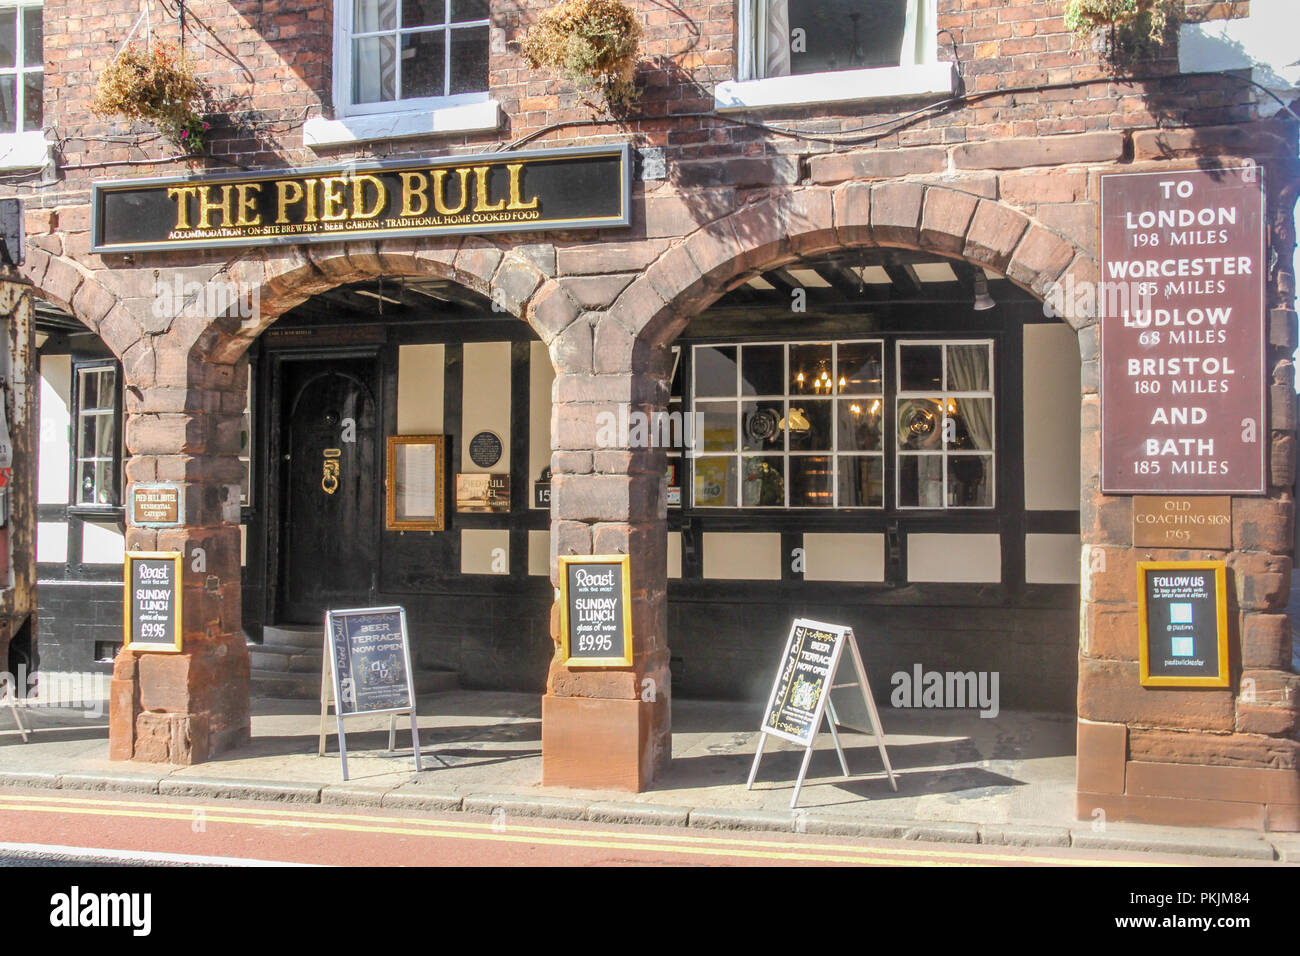 Chester, England - 16th August 2016: The Pied Bull public houses. The pub is located on Northgate Street. Stock Photo